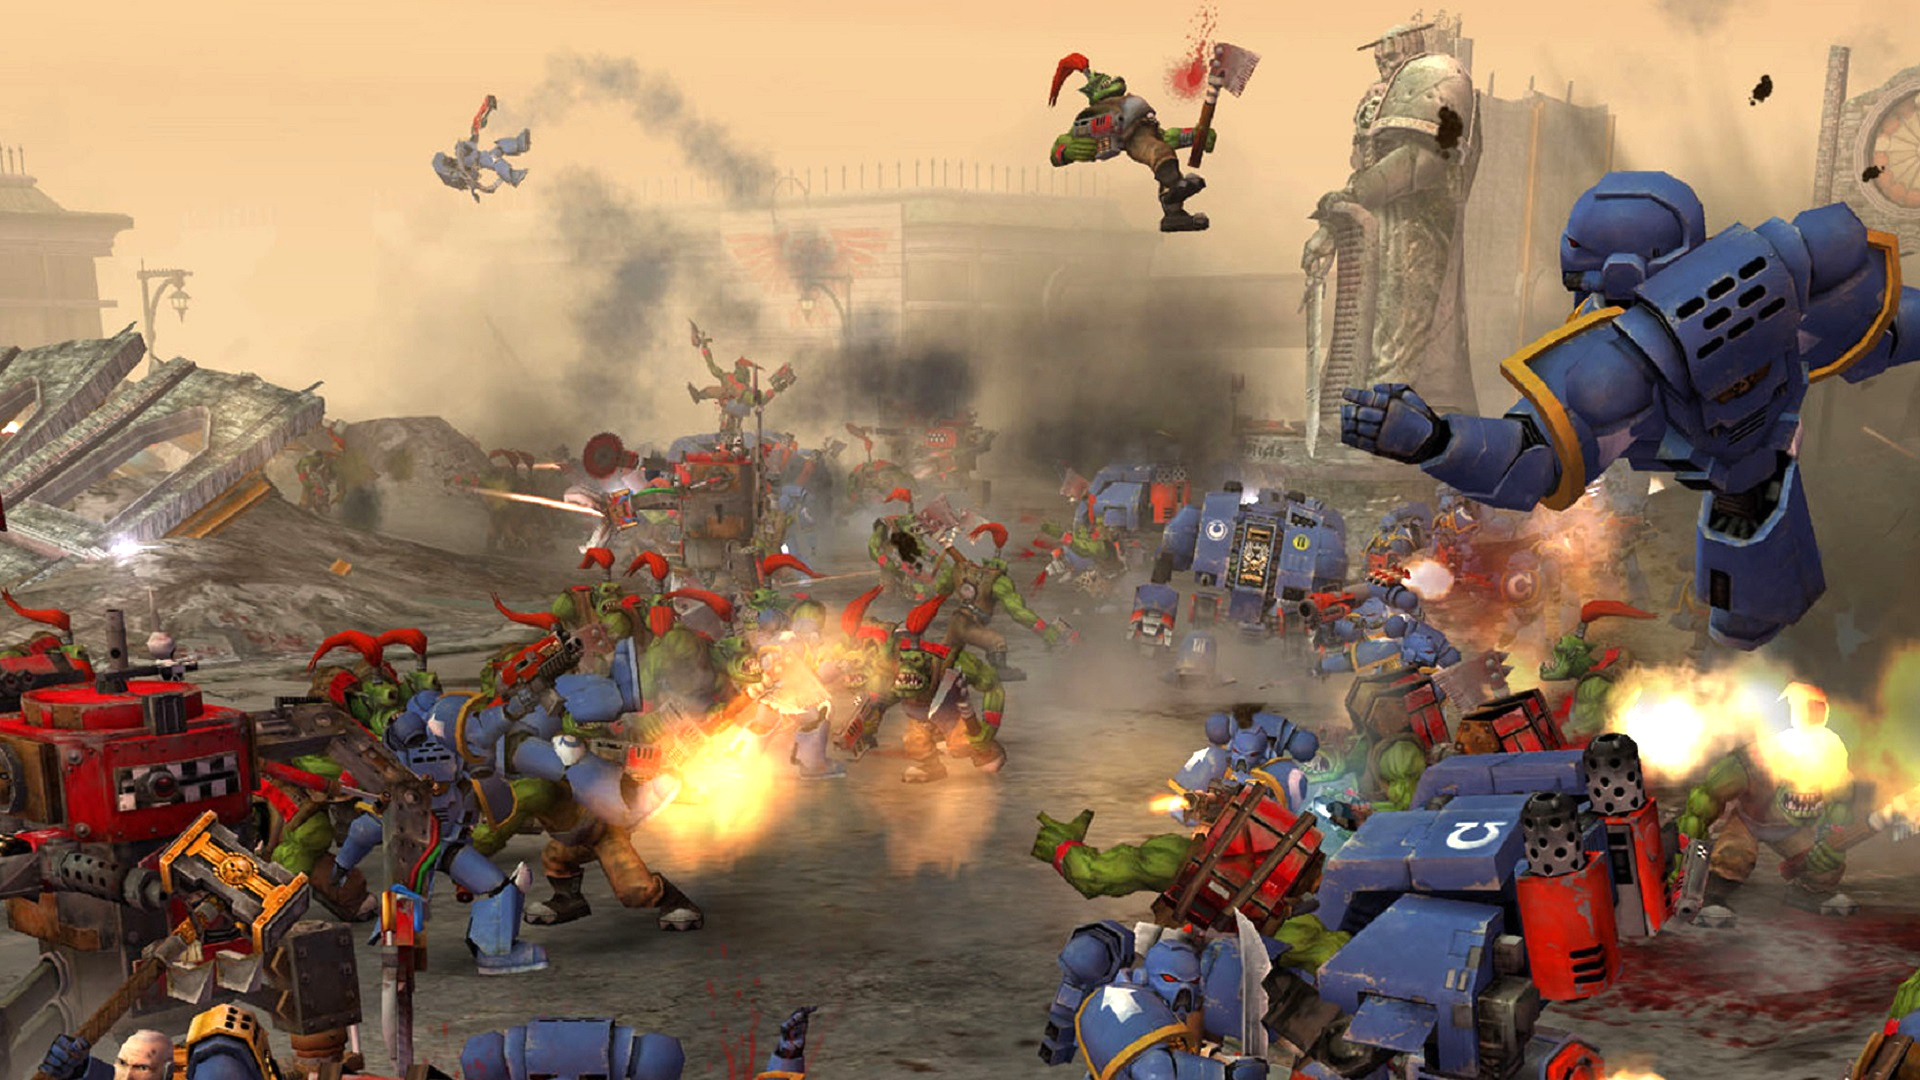 Space Marines and Orks clash in Warhammer 40k game Dawn of War